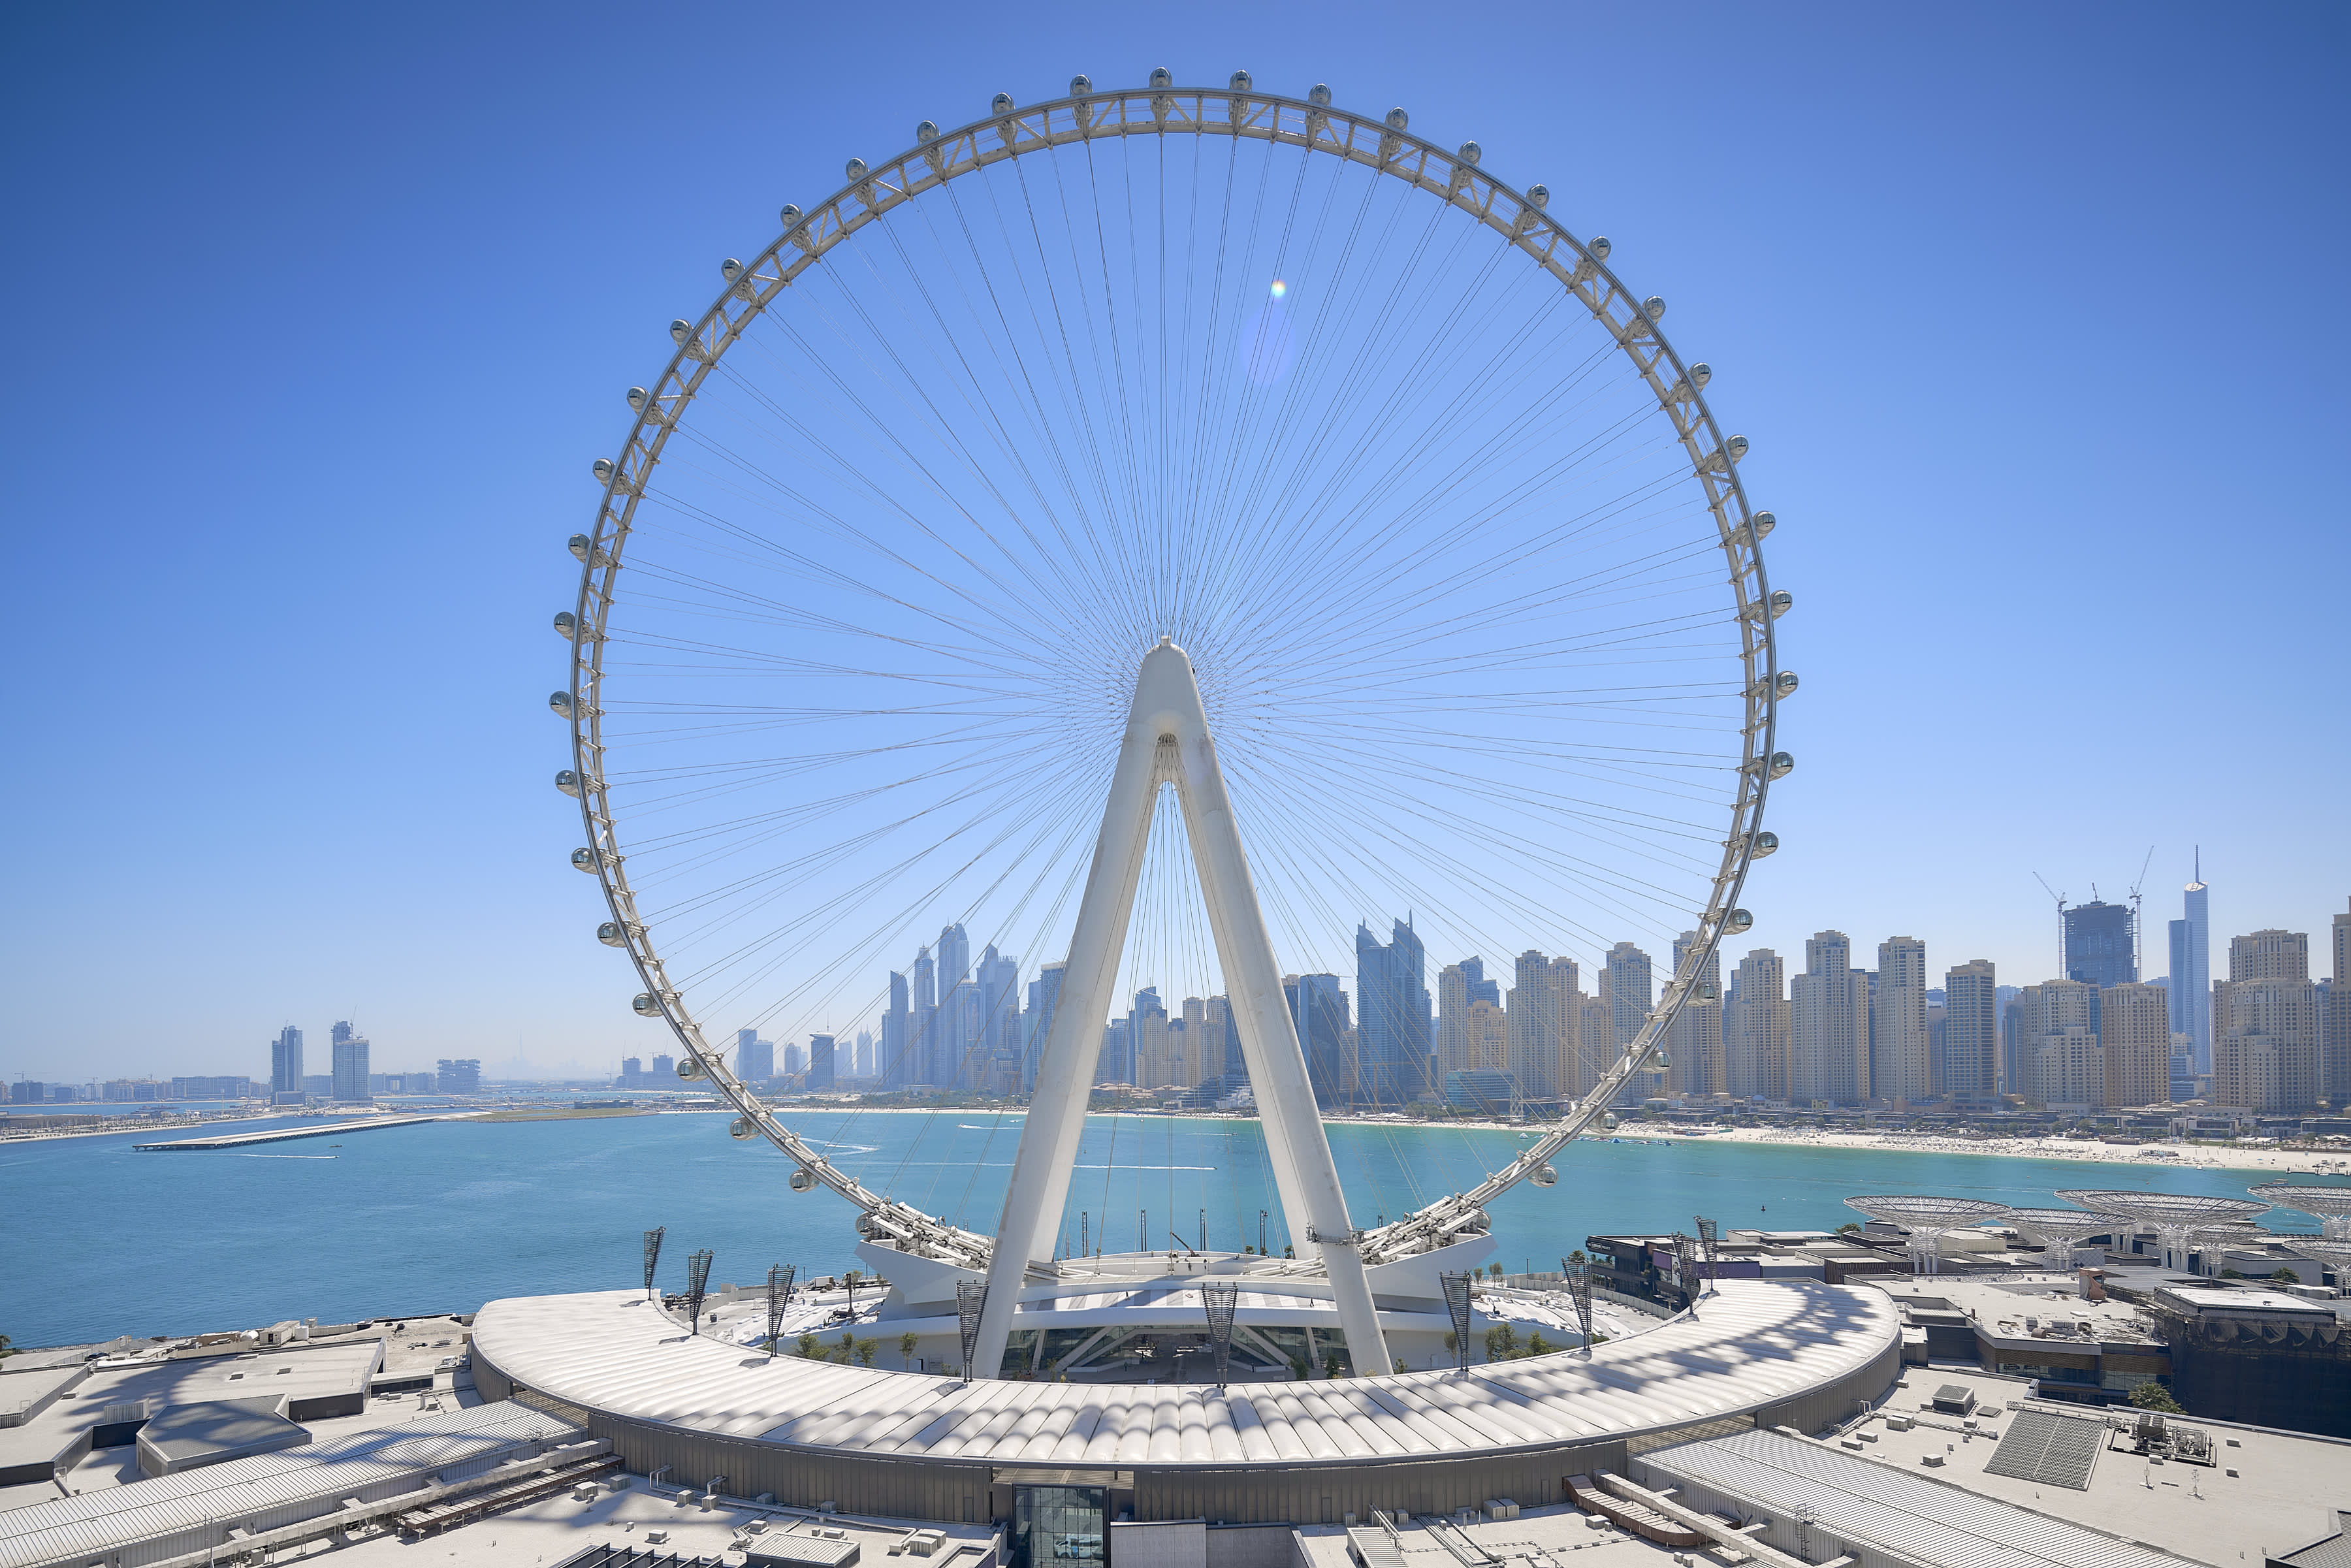 The world's tallest observation wheel is opening in Dubai next month